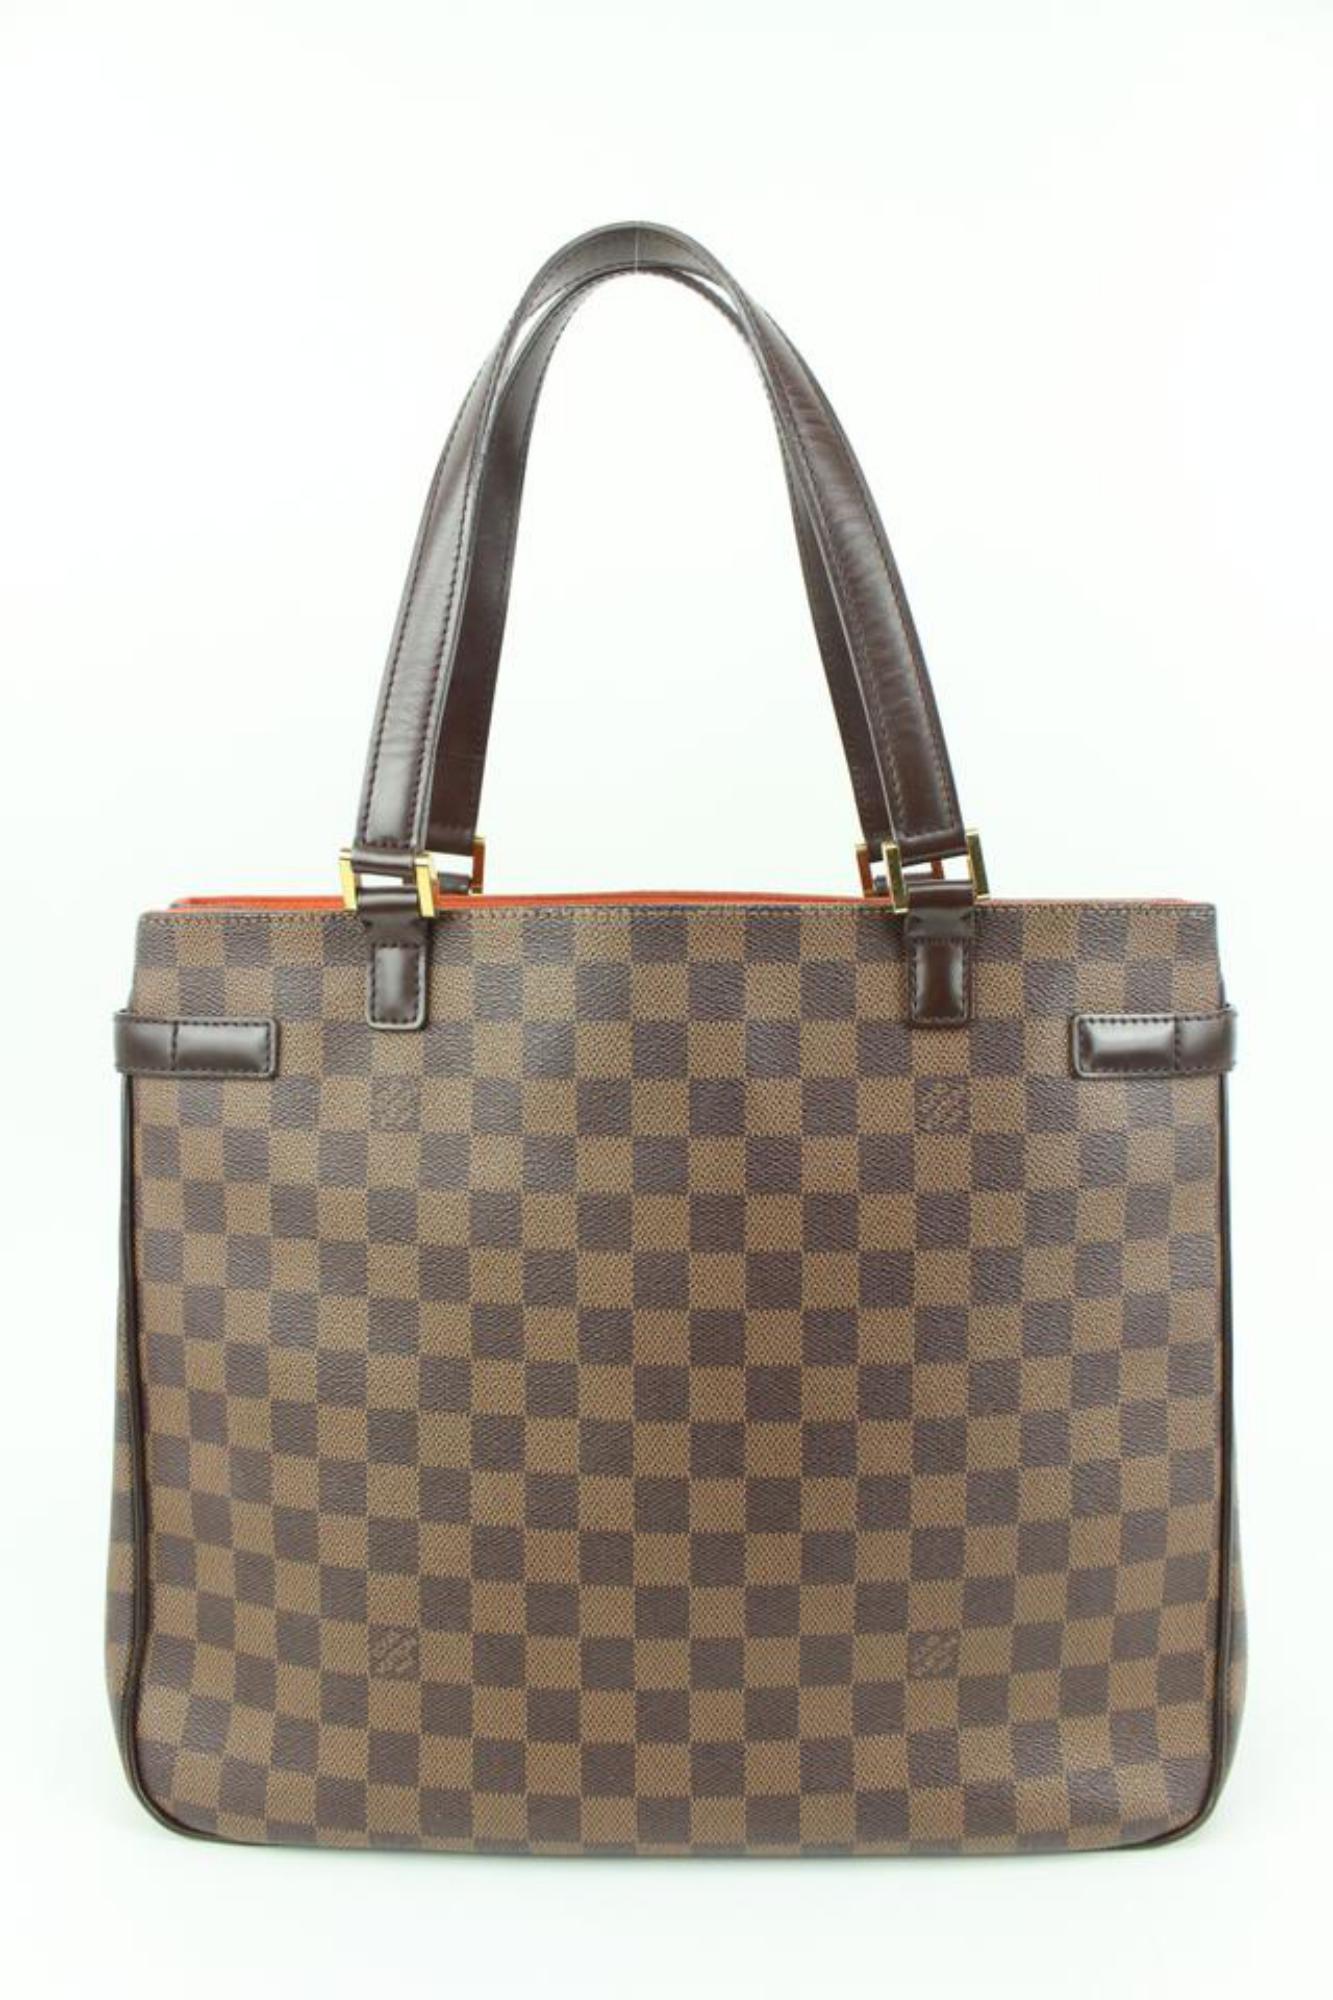 Louis Vuitton Discontinued Damier Ebene Uzes Manhattan Shoulder Bag 5lk323s In Good Condition For Sale In Dix hills, NY